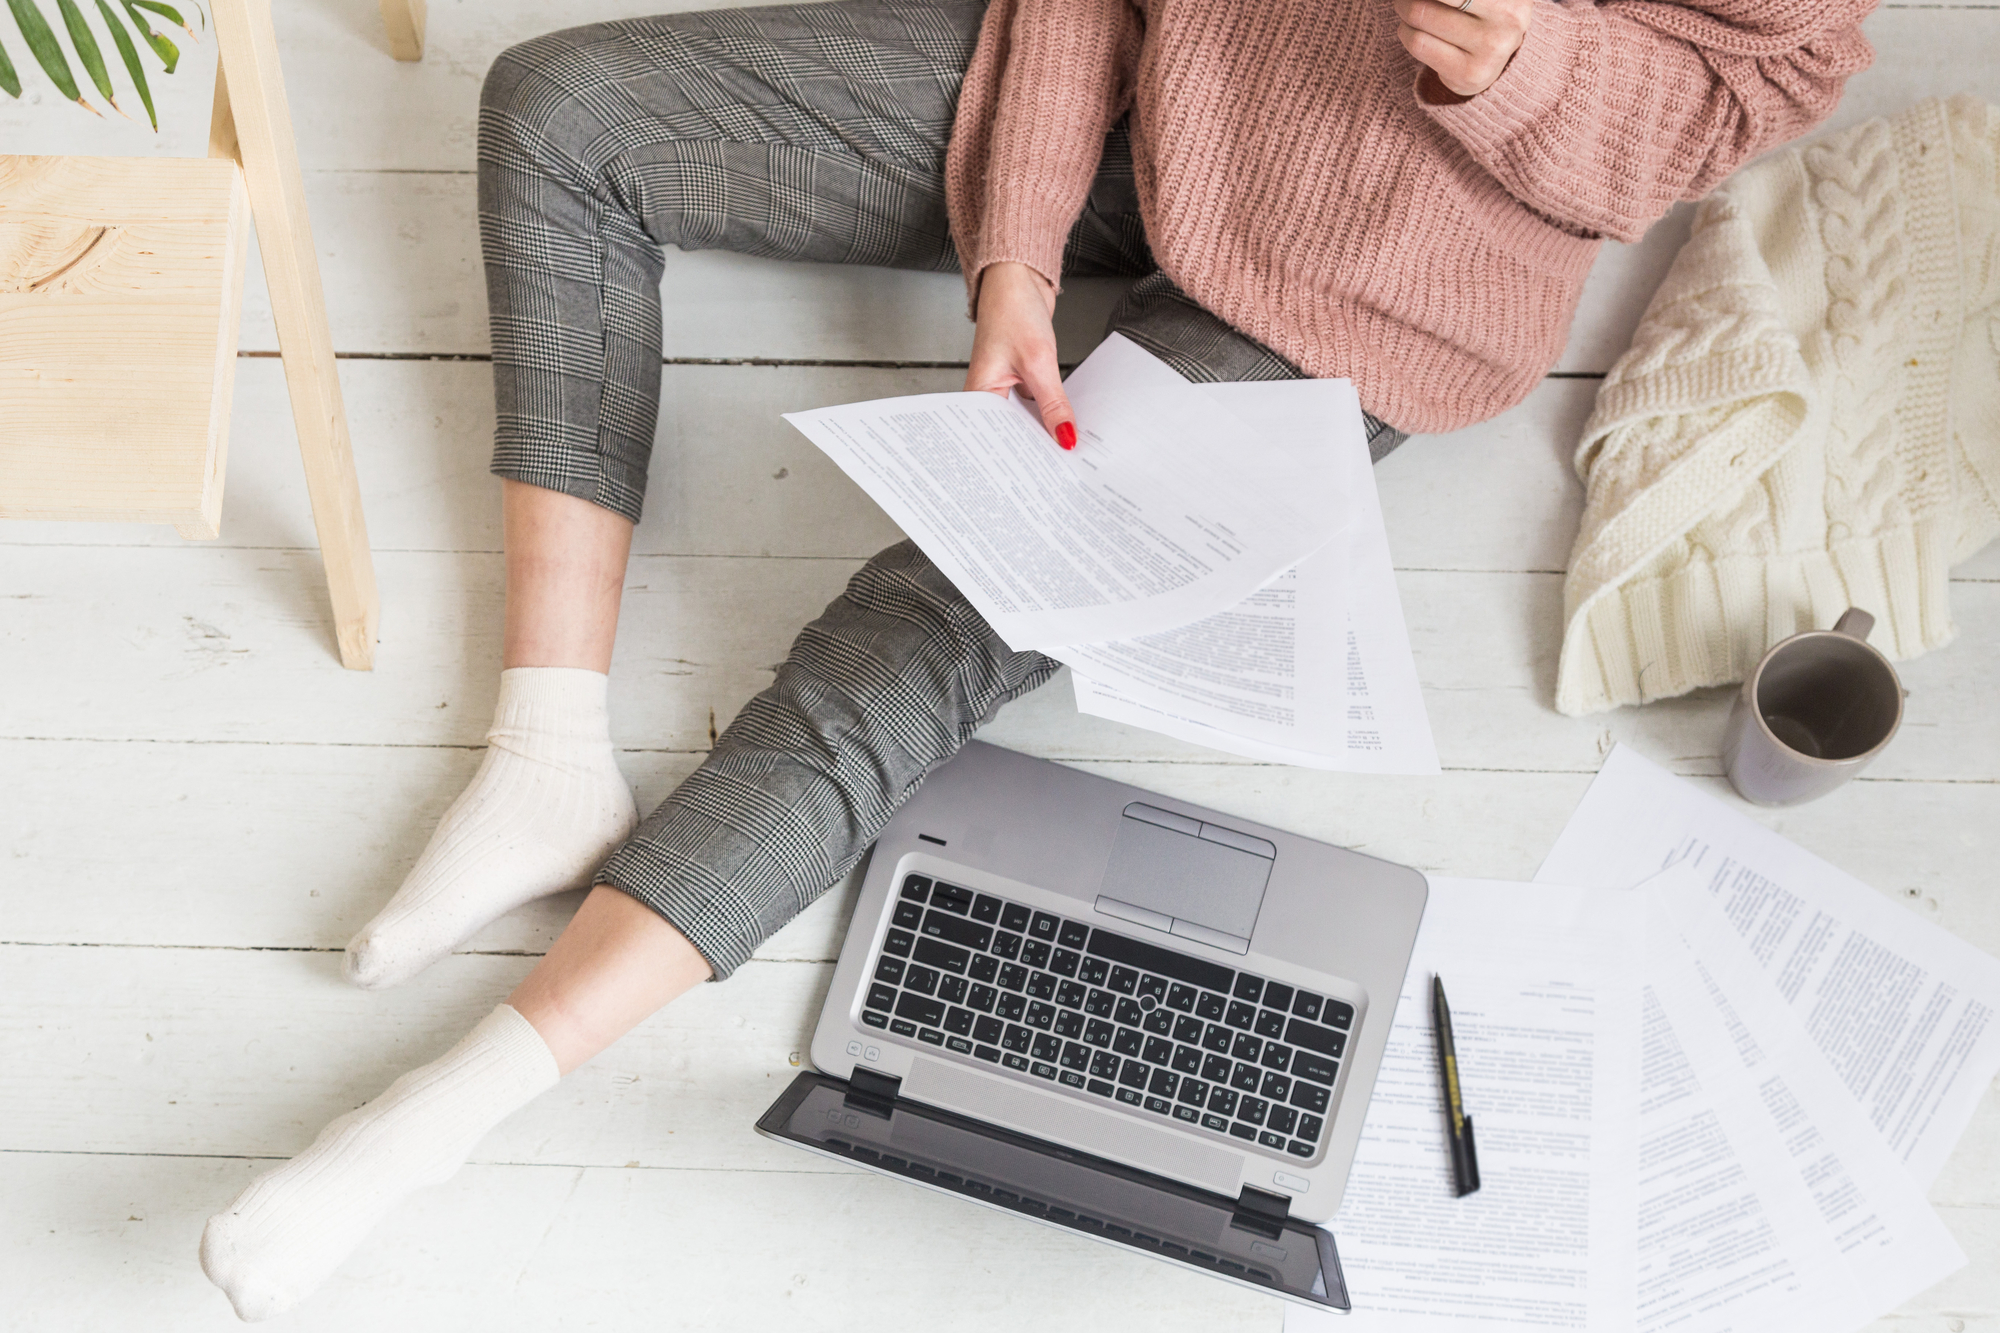 Female student in pink top and grey leggings sits on the floor with her laptop and several sheets of paper, working on her freelance writing side hustle student job